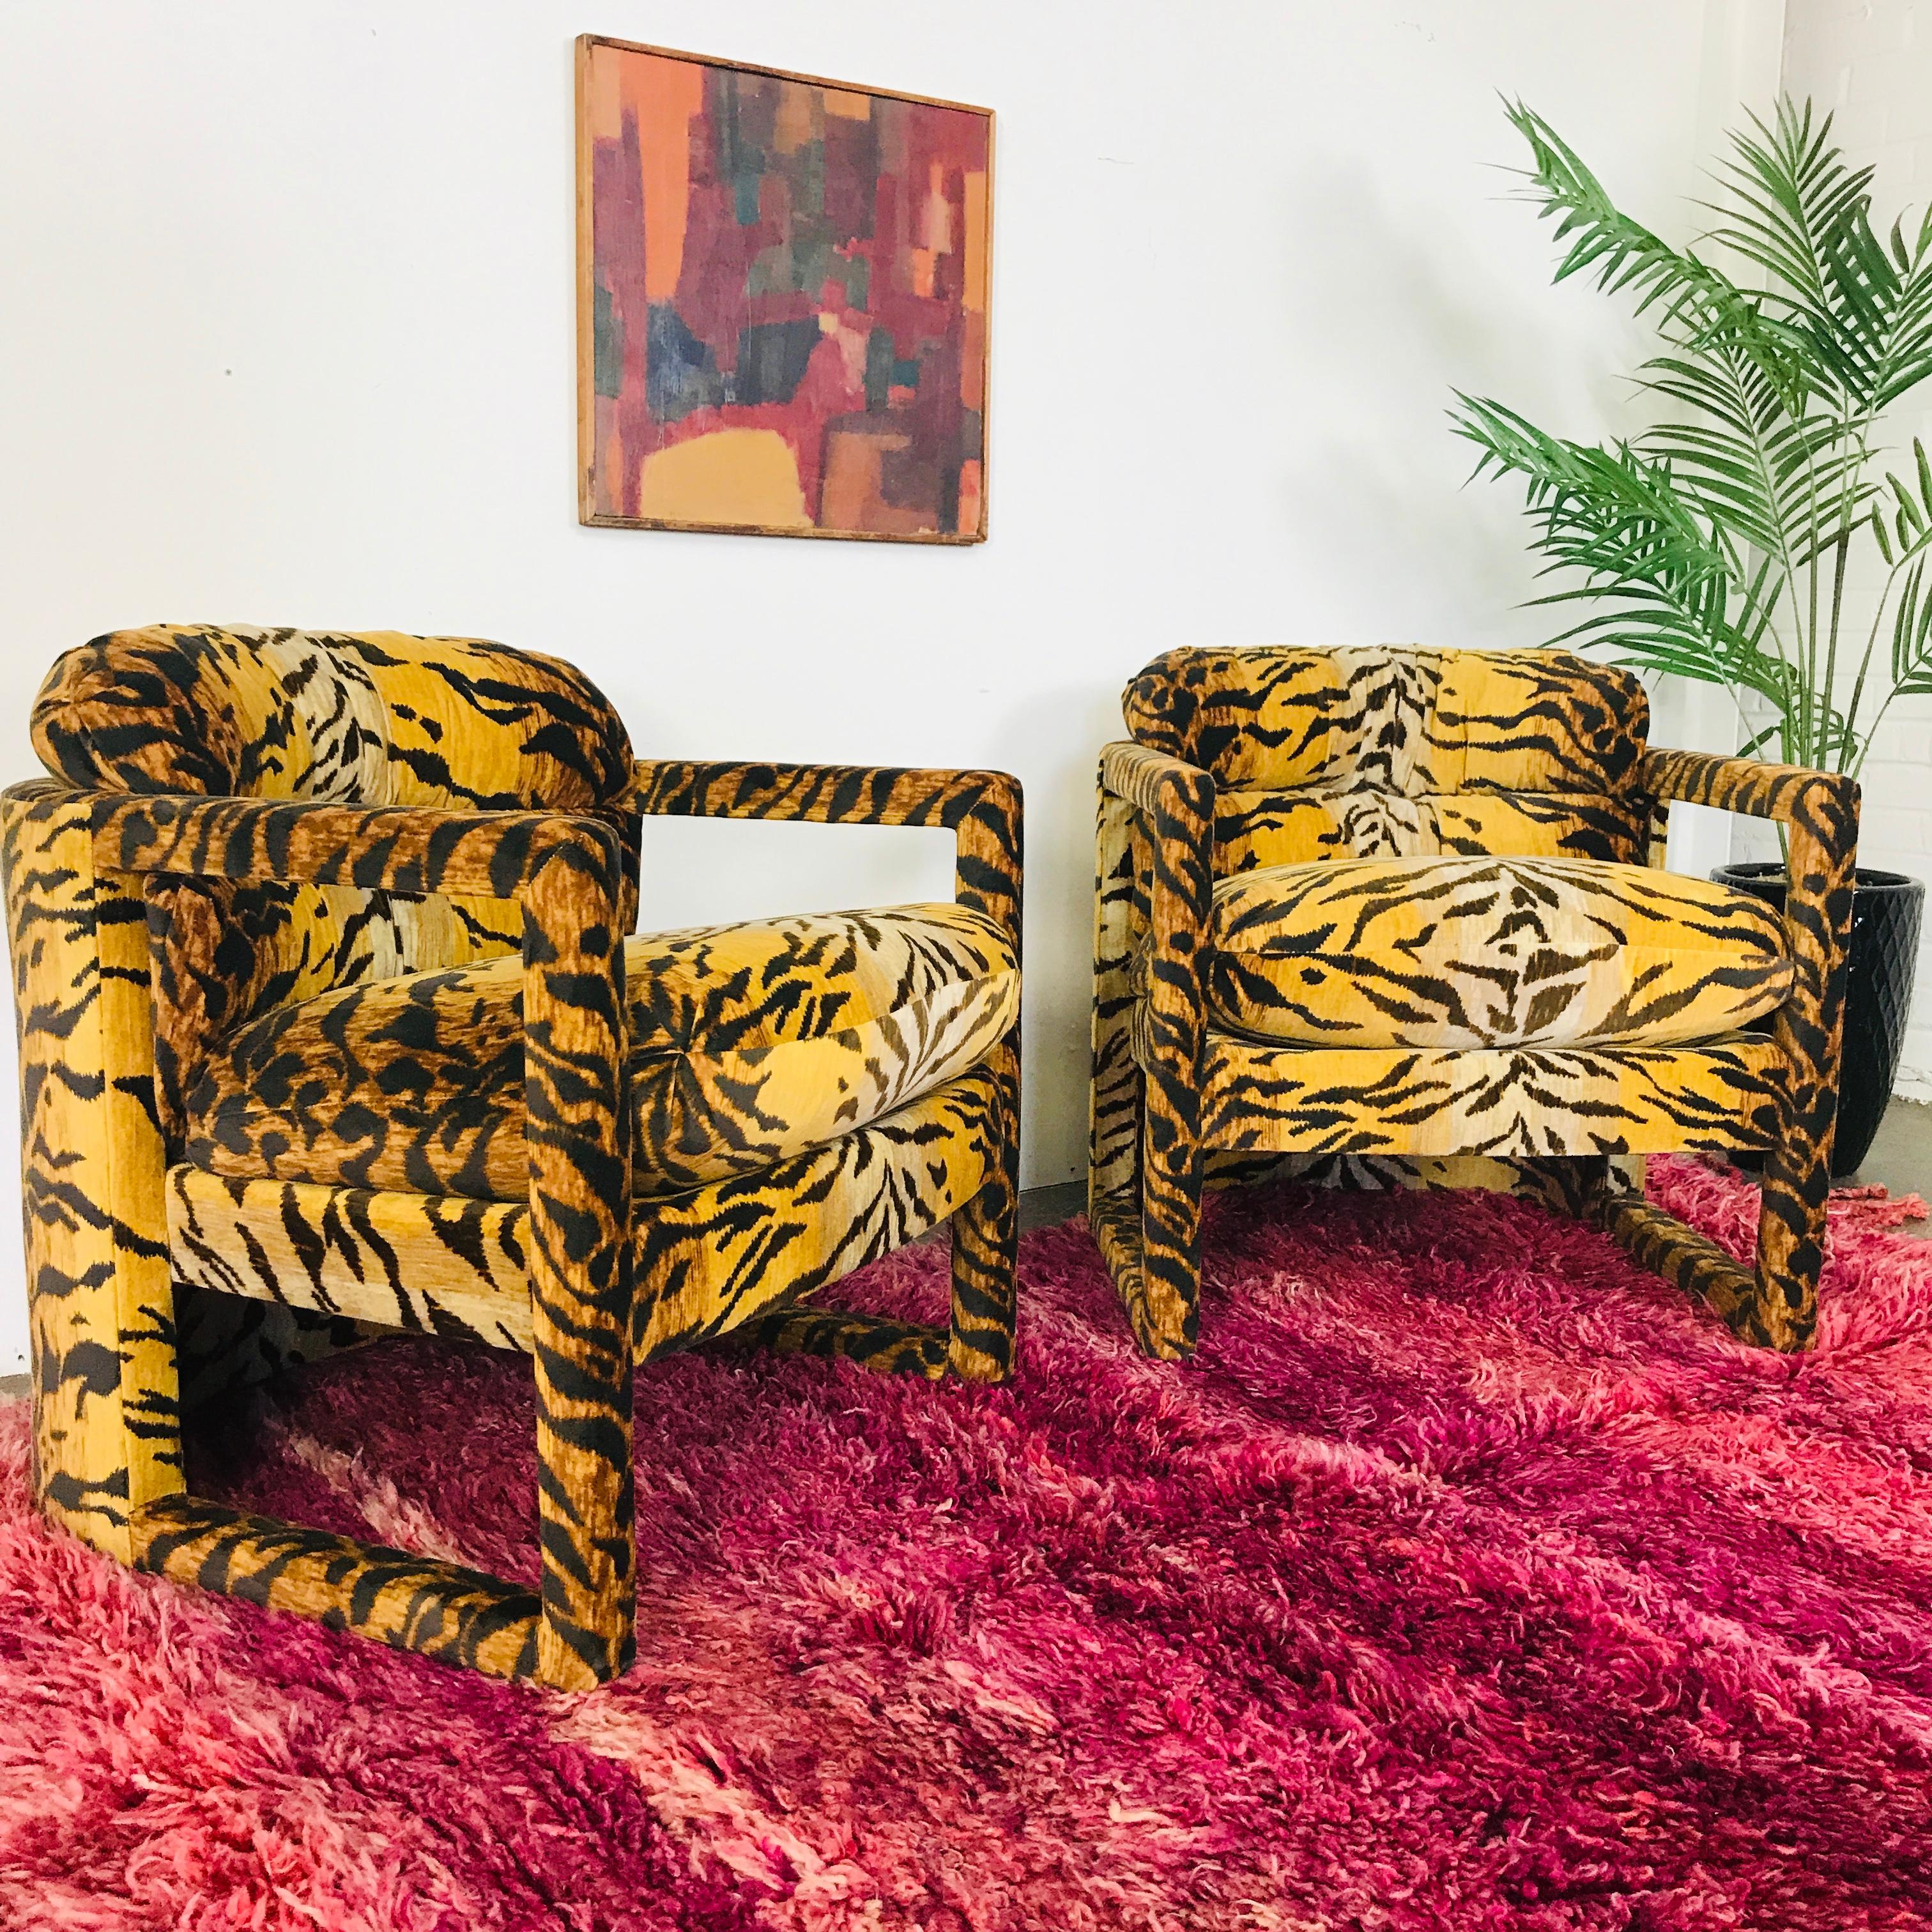 Fabulous pair of custom built chairs with tiger print upholstery (as shown) or your choice of fabric for $5600 + 12 yards COM.